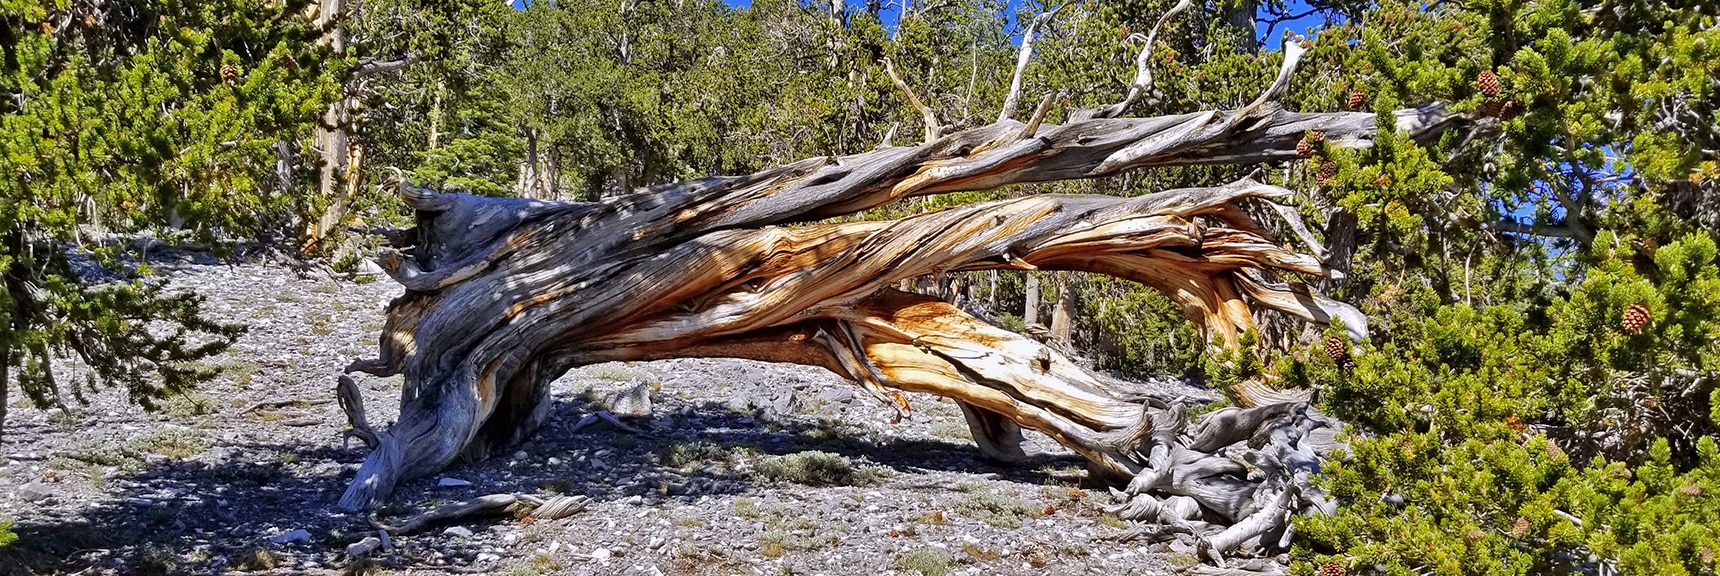 Fallen Ancient Bristlecone Pine Near Summit of Robbers Roost Canyon | Fletcher Peak from Robbers Roost | Spring Mountains, Nevada